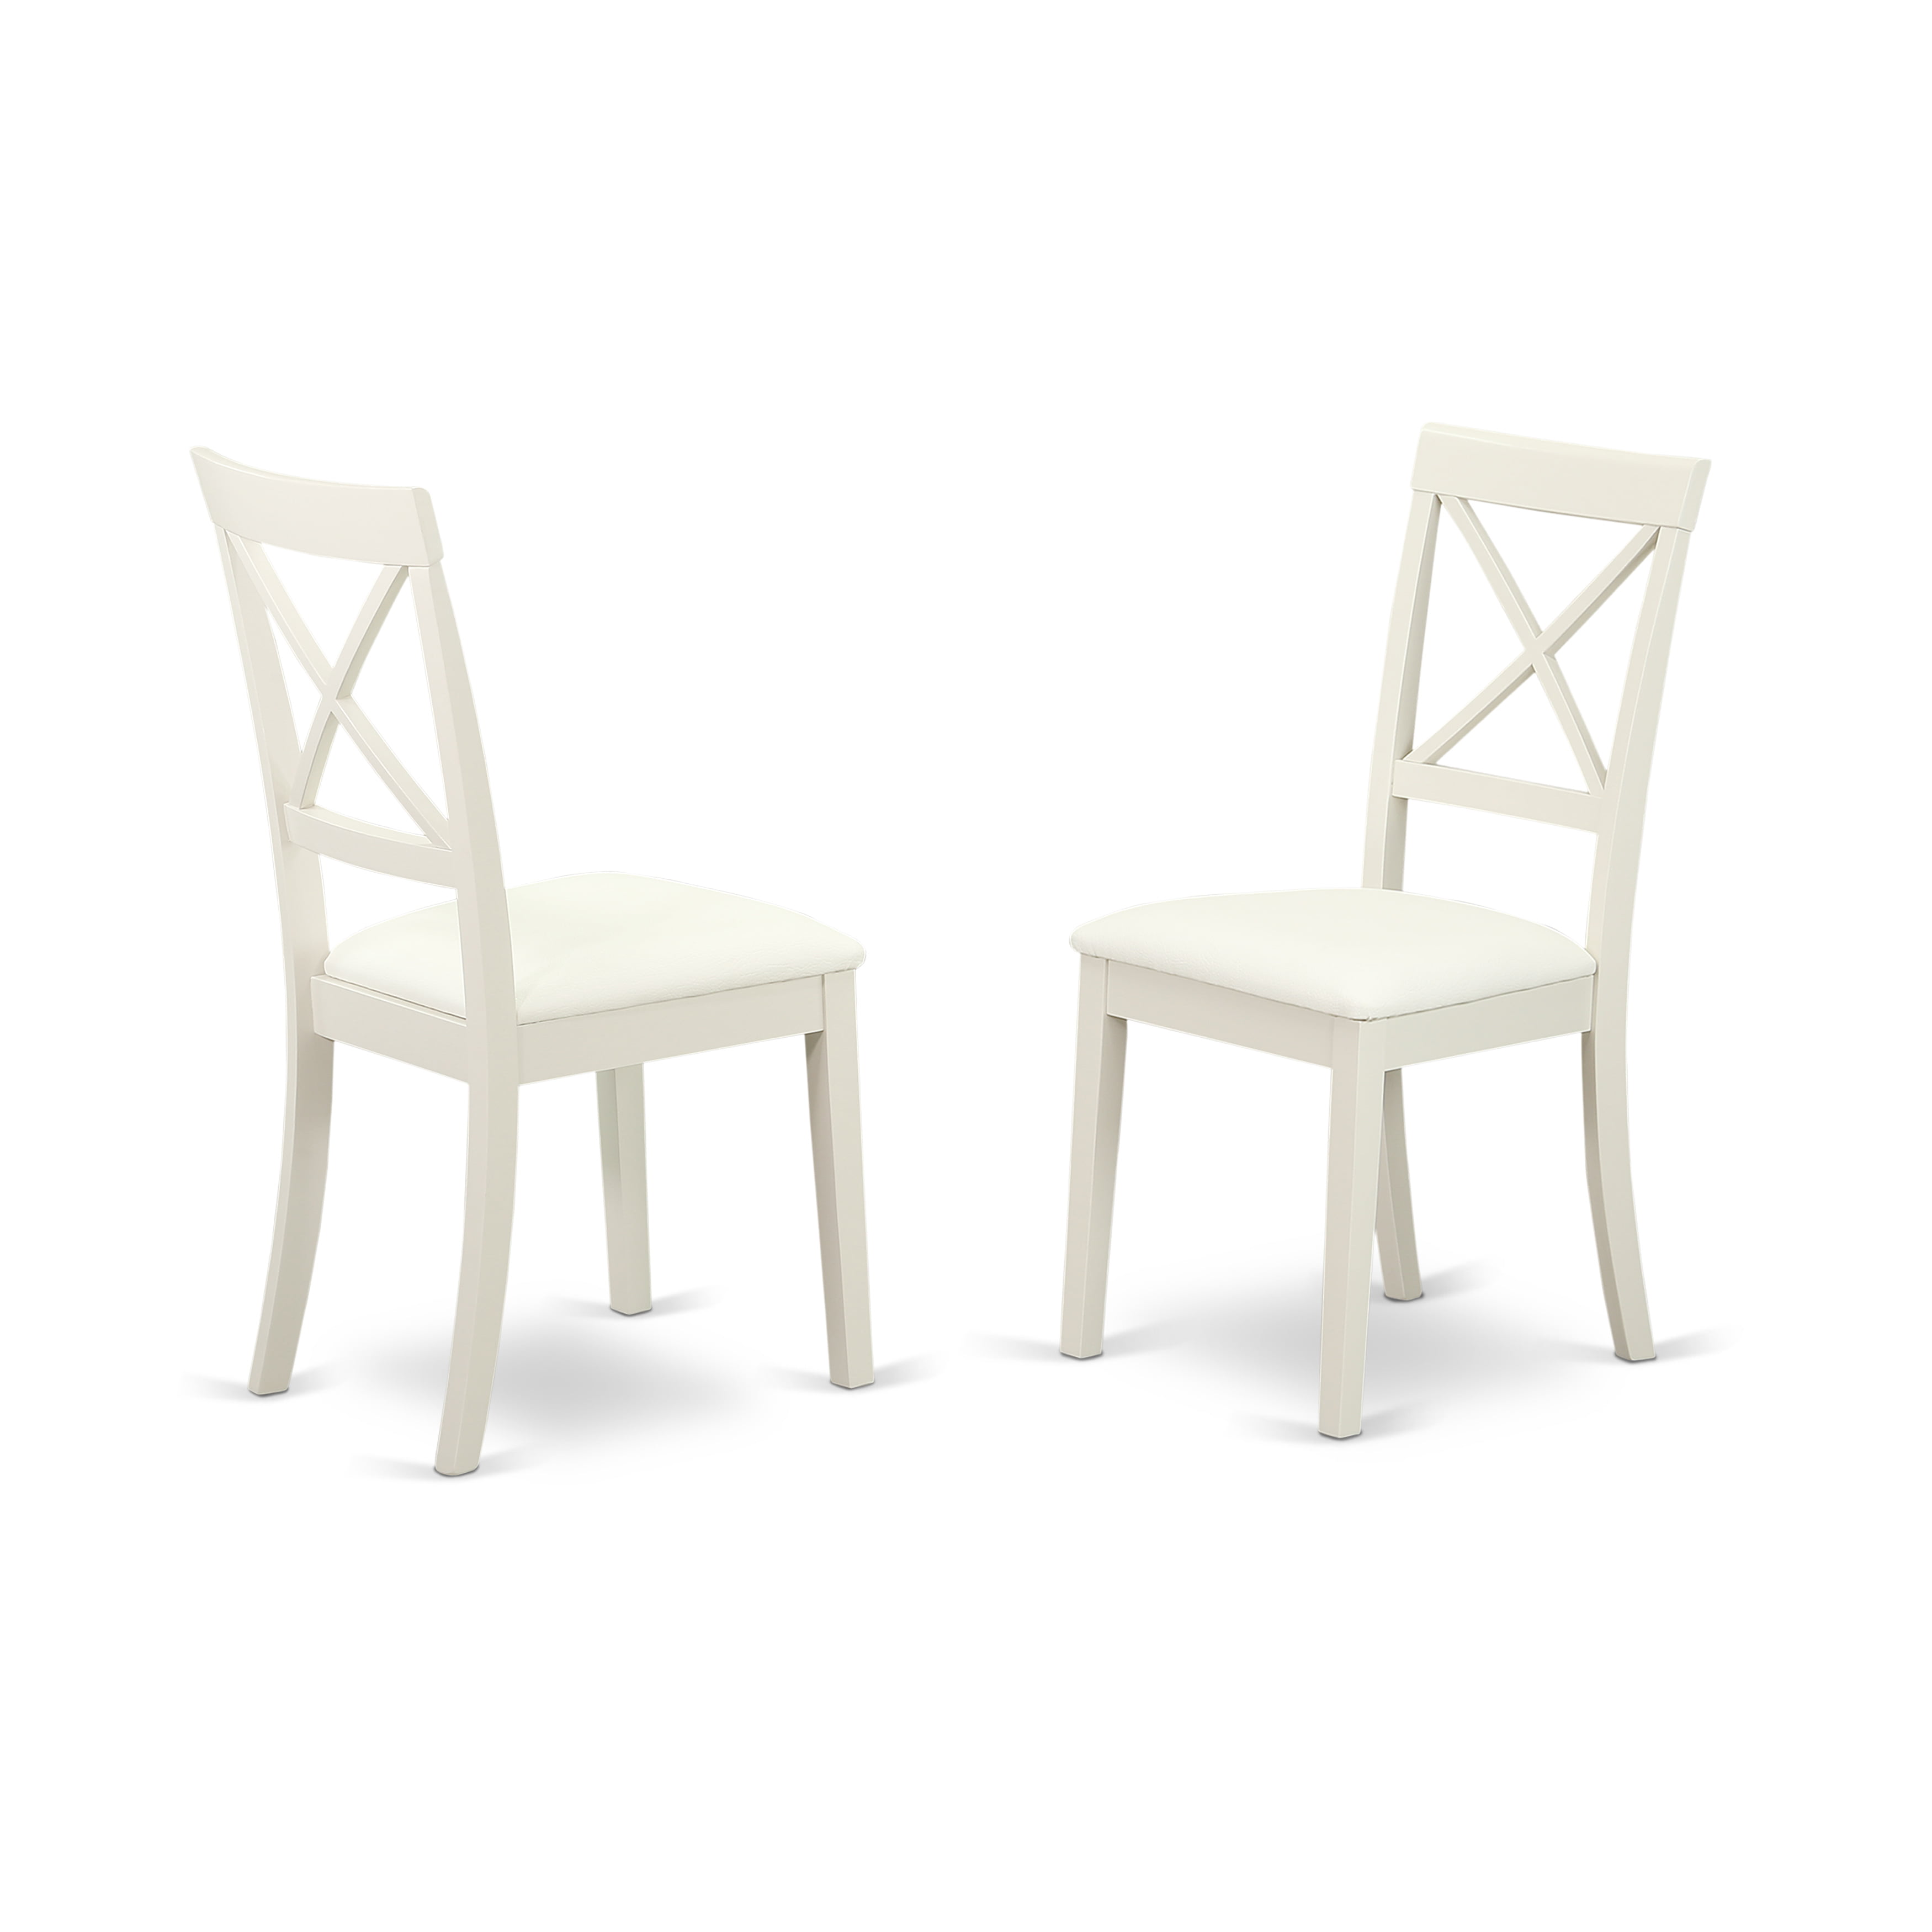 Table and 2 faux leather seat dining chairs in linen white finish OXBO3-LWH-LC 3-Piece Dinette table set